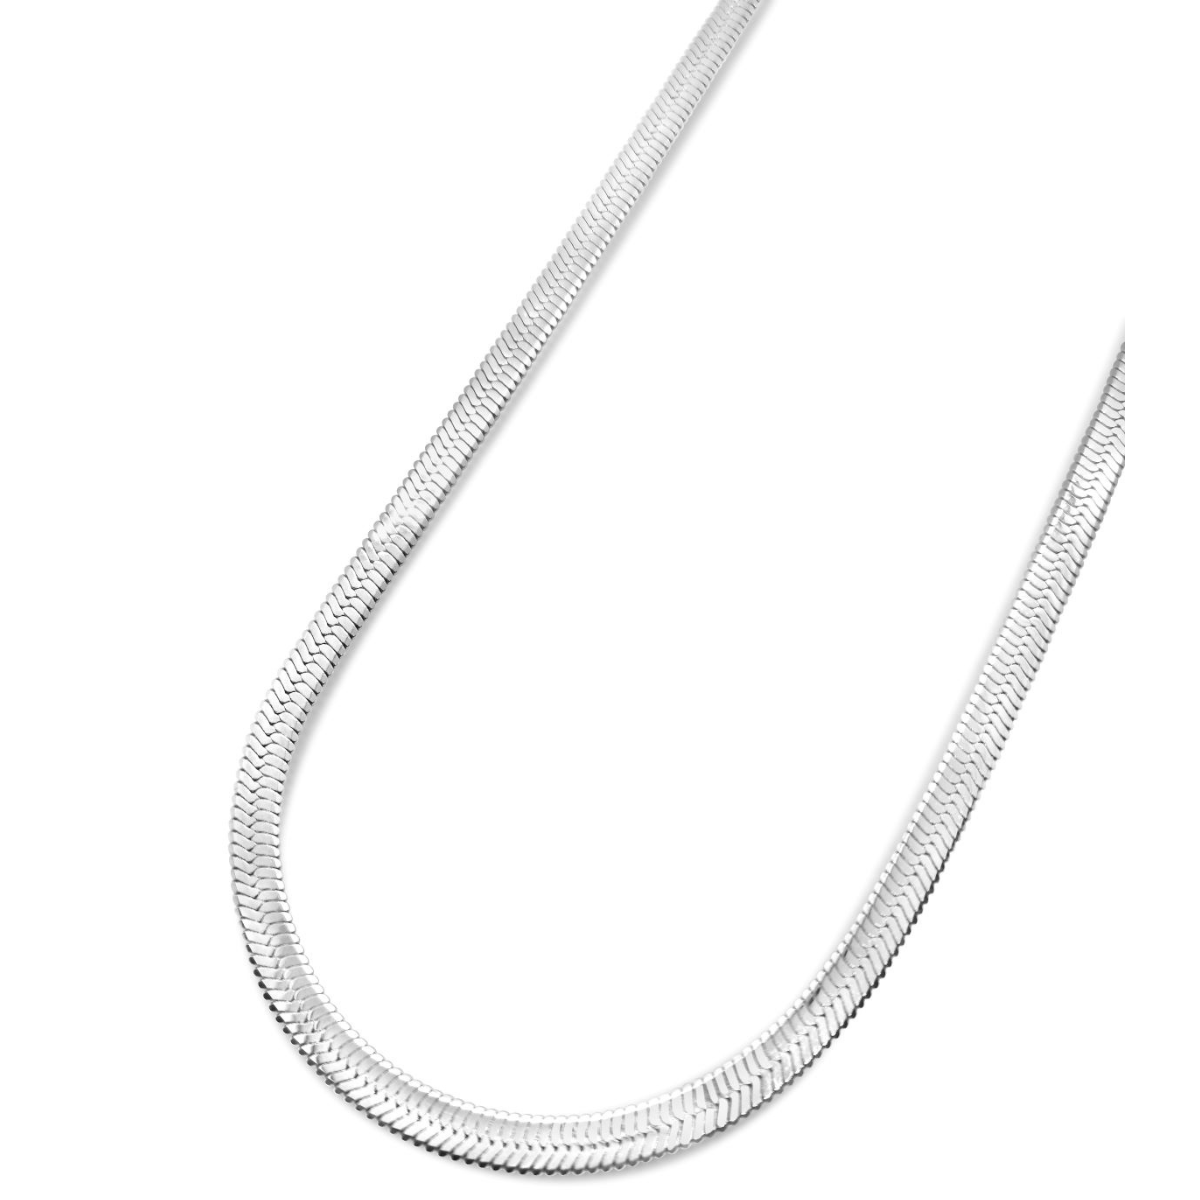 Snake Chain Necklace - Silver - 41cm